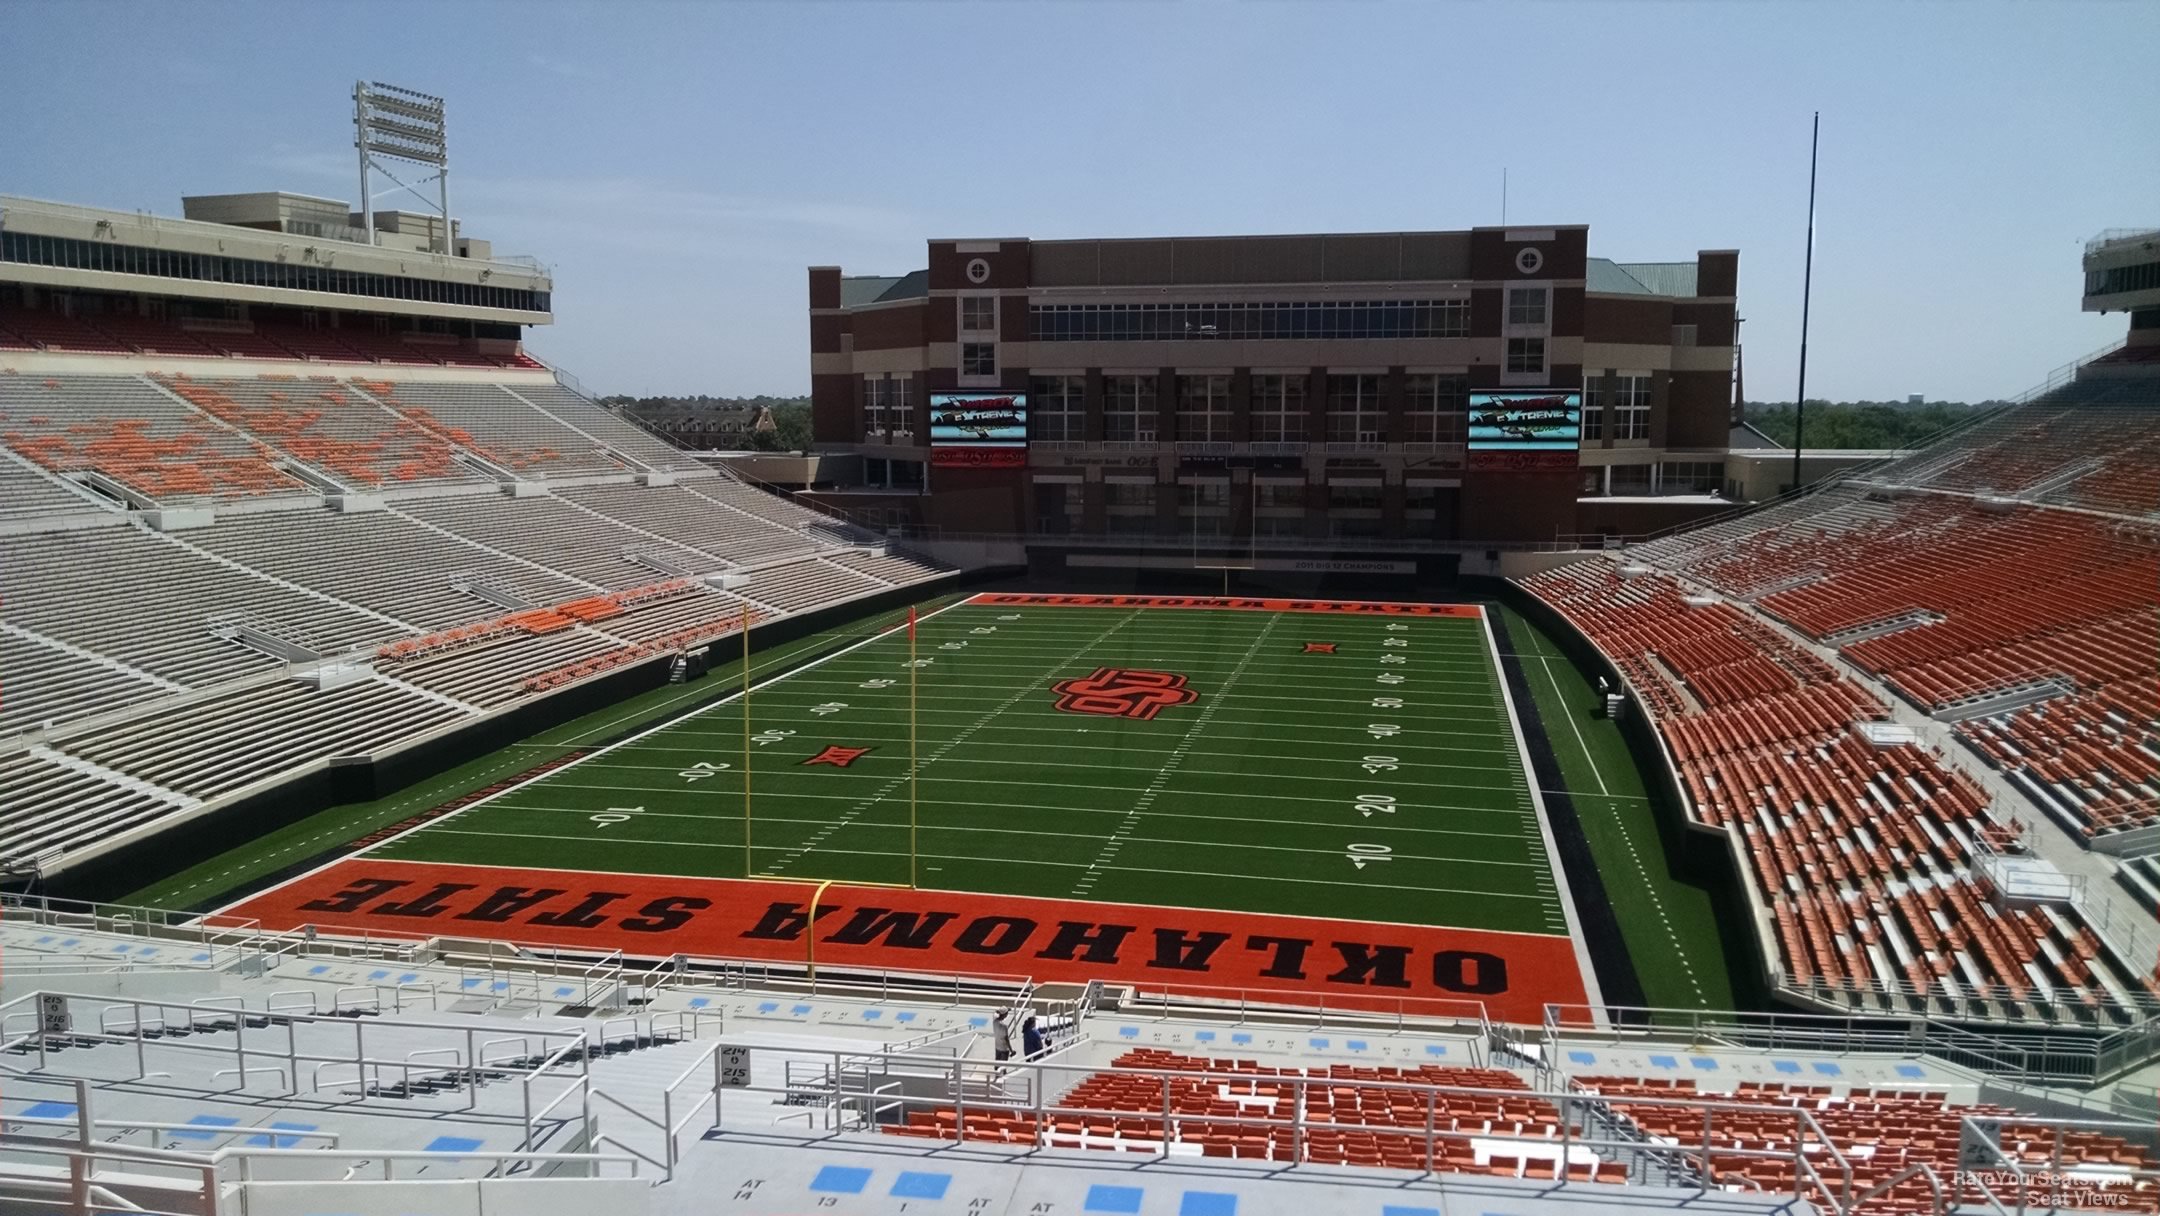 section 317, row 19 seat view  - boone pickens stadium